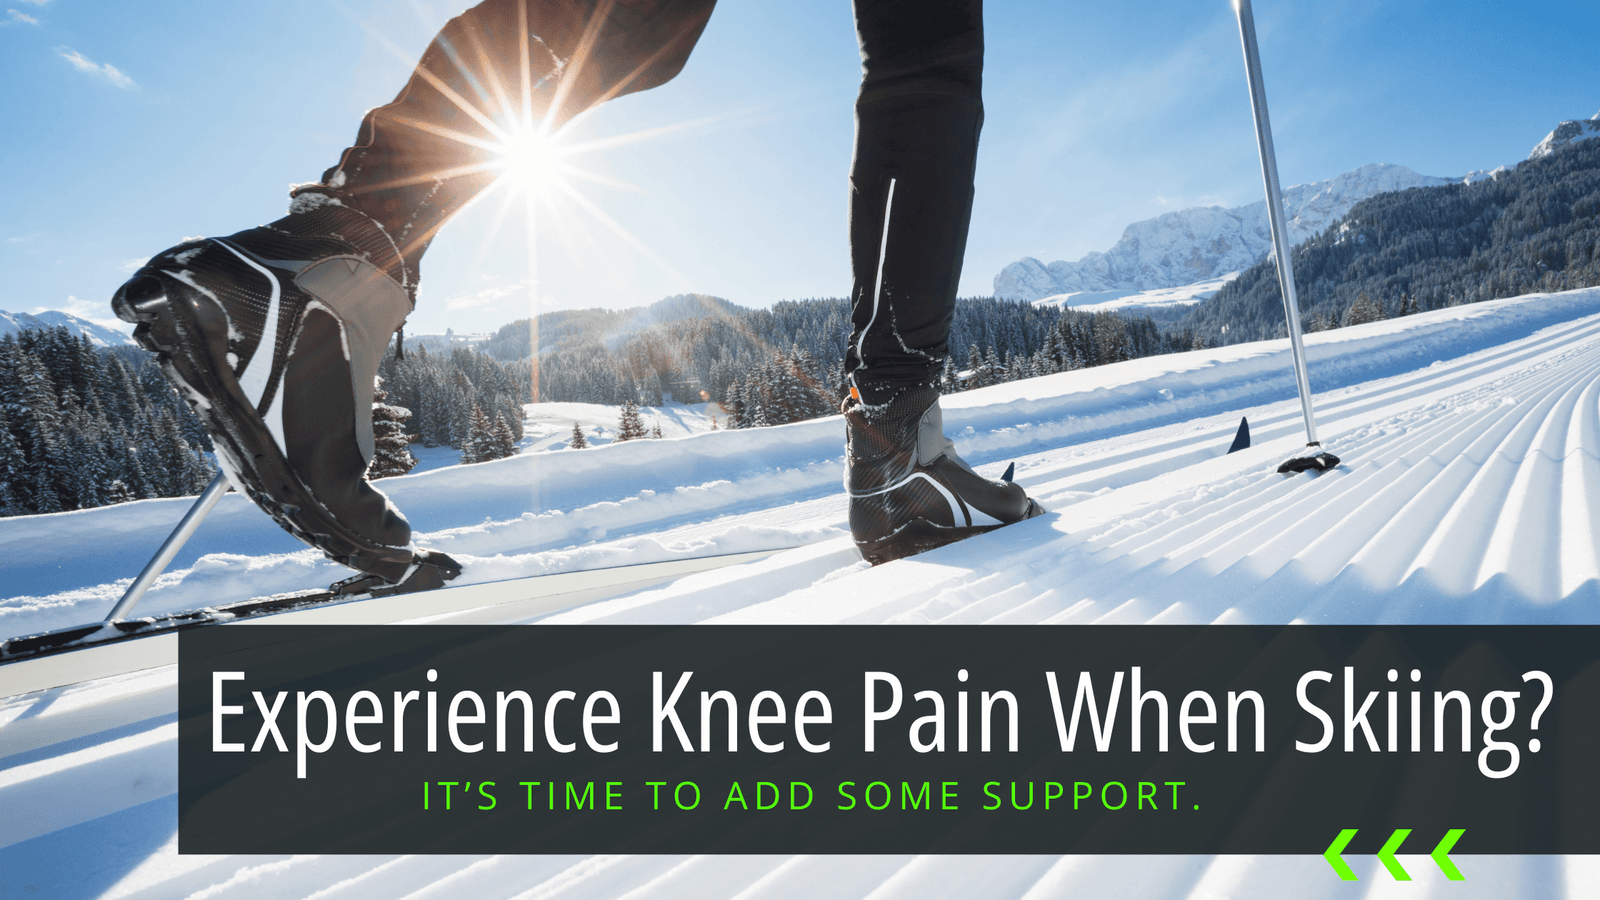 Bracelayer Blogs: Header image containing the feet and knees of a skier to introduce the "Experience knee pain when skiing?" blog. Skiing injuries knee, knee injury from skiing, knee pain skiing, knee pain after skiing, knee support brace for skiing.